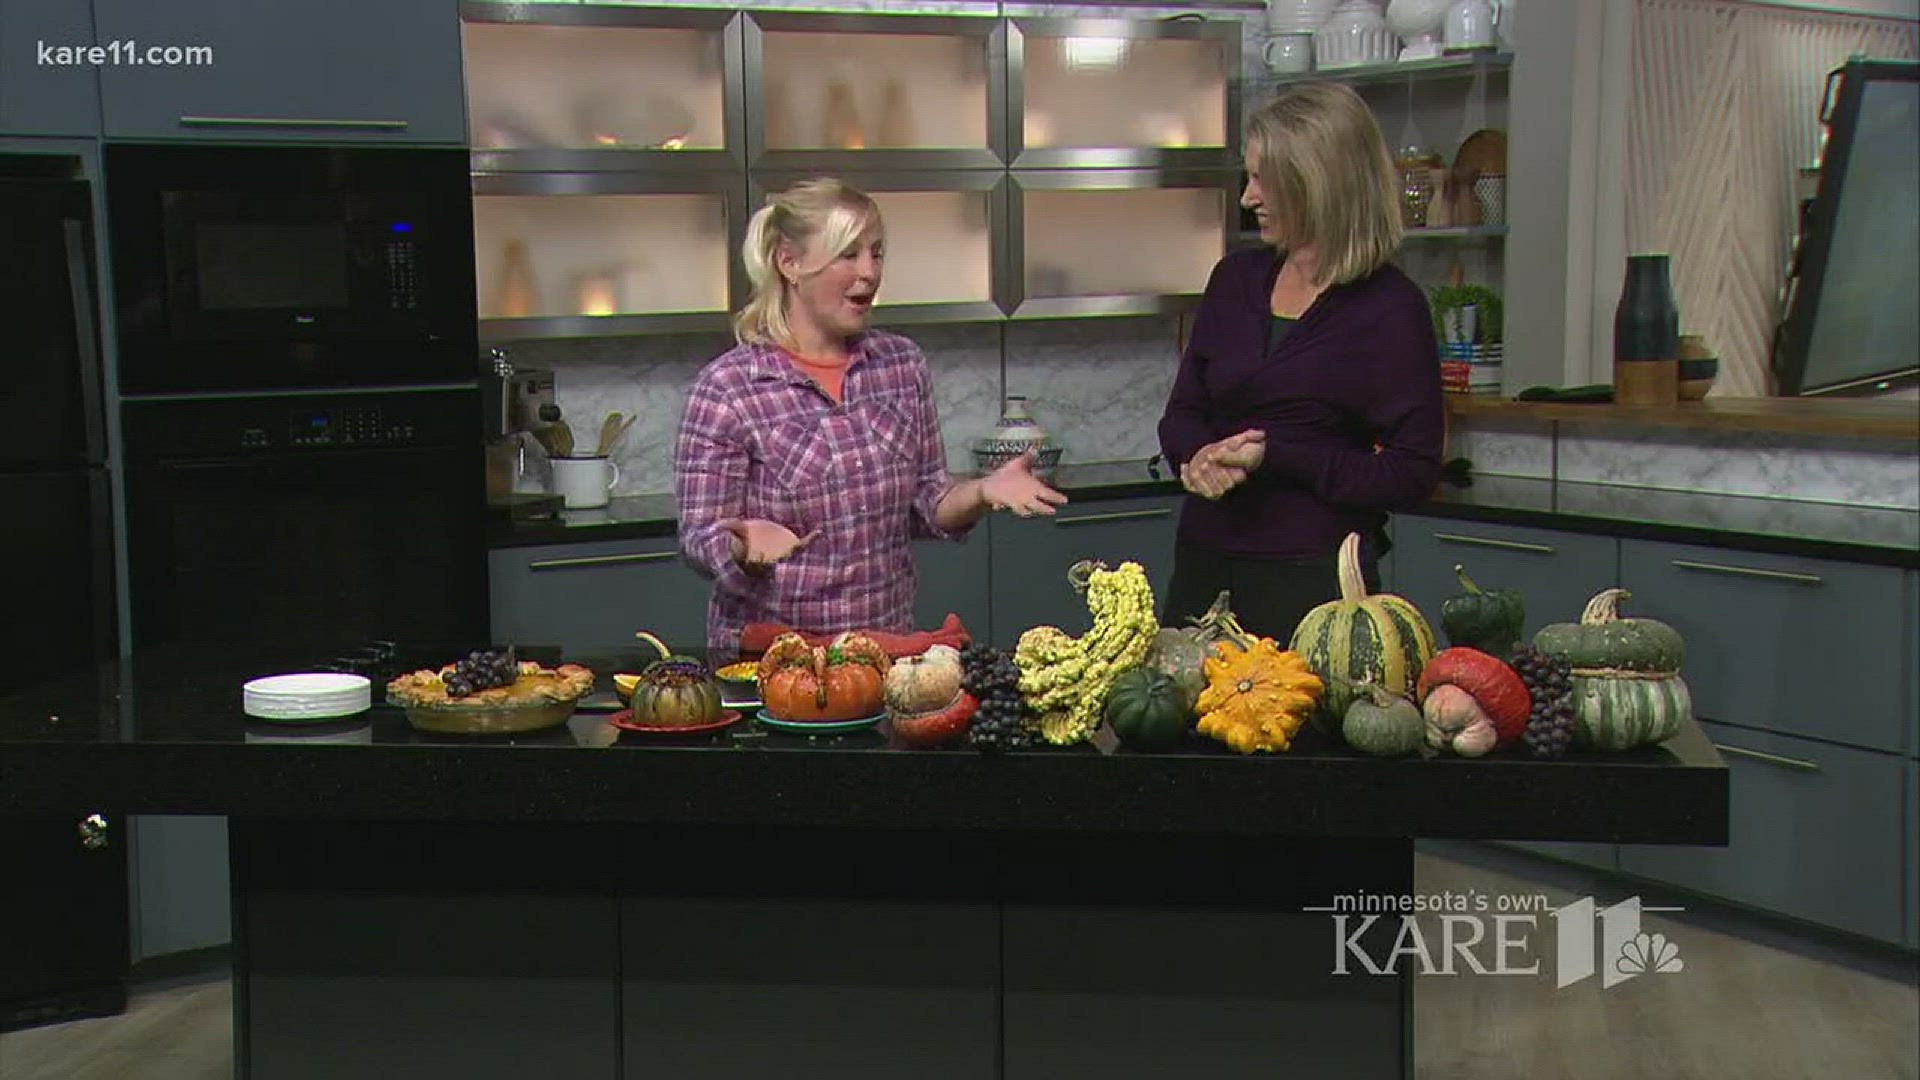 MN Landscape Arboretum shows us recipes for fun fall food.